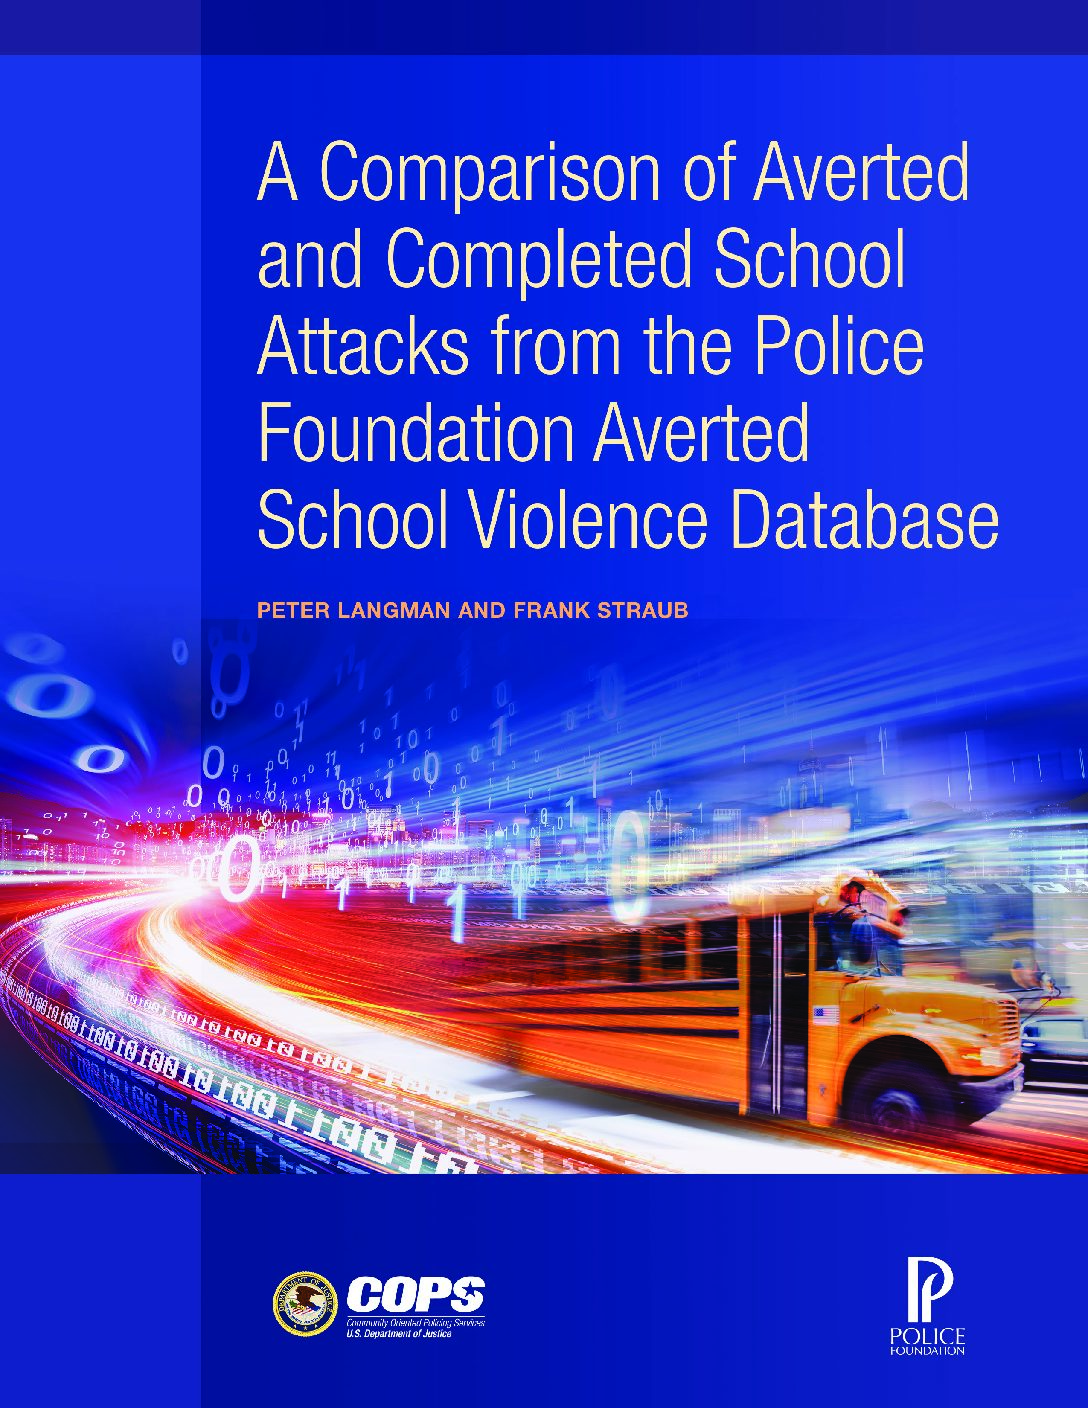 ASV Comparison of Averted and Completed Attacks report cover